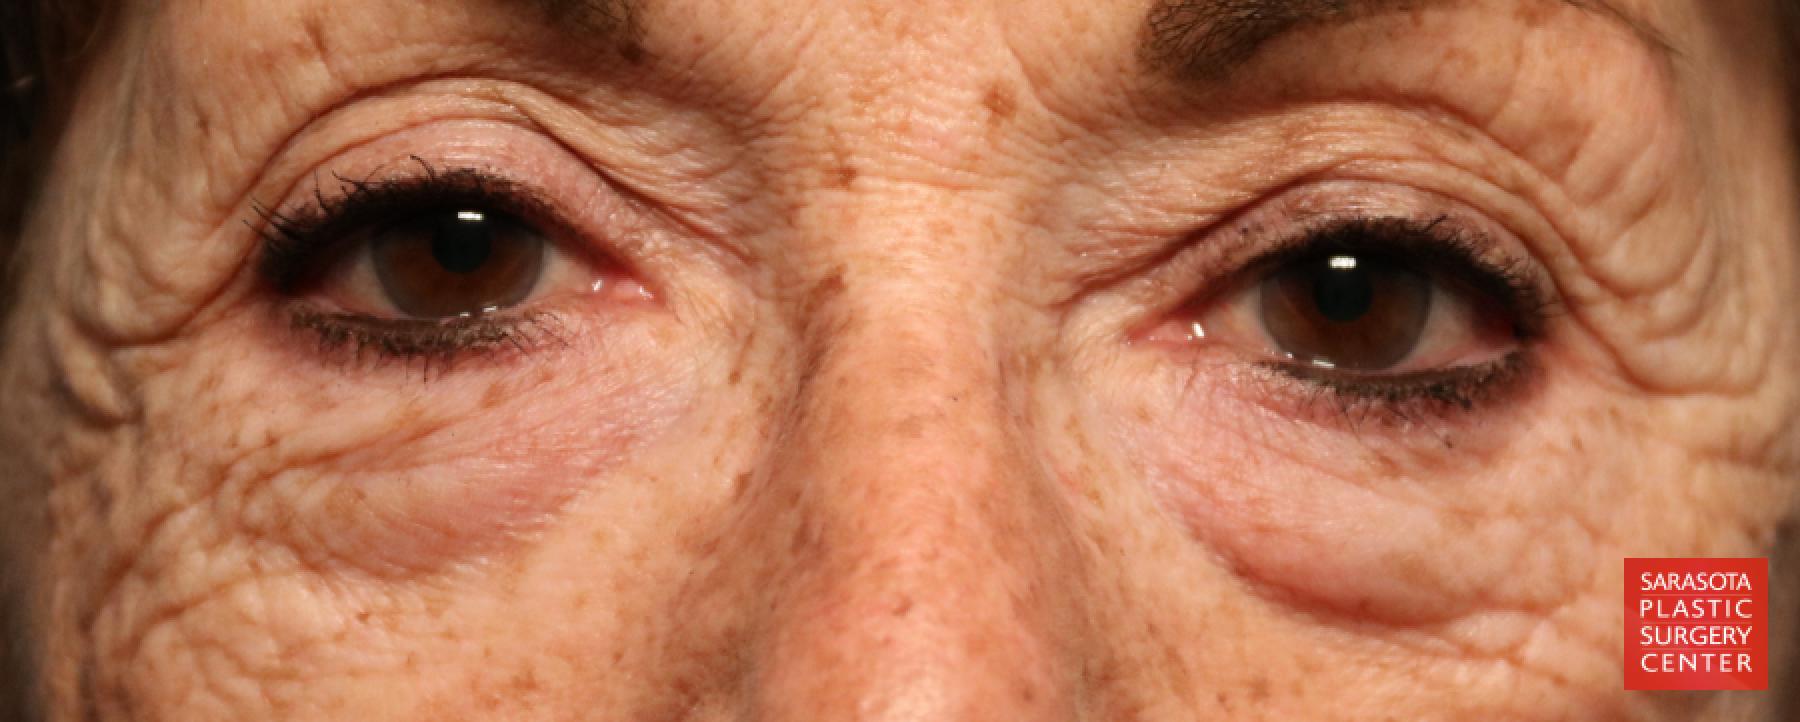 Eyelid Lift: Patient 6 - Before 